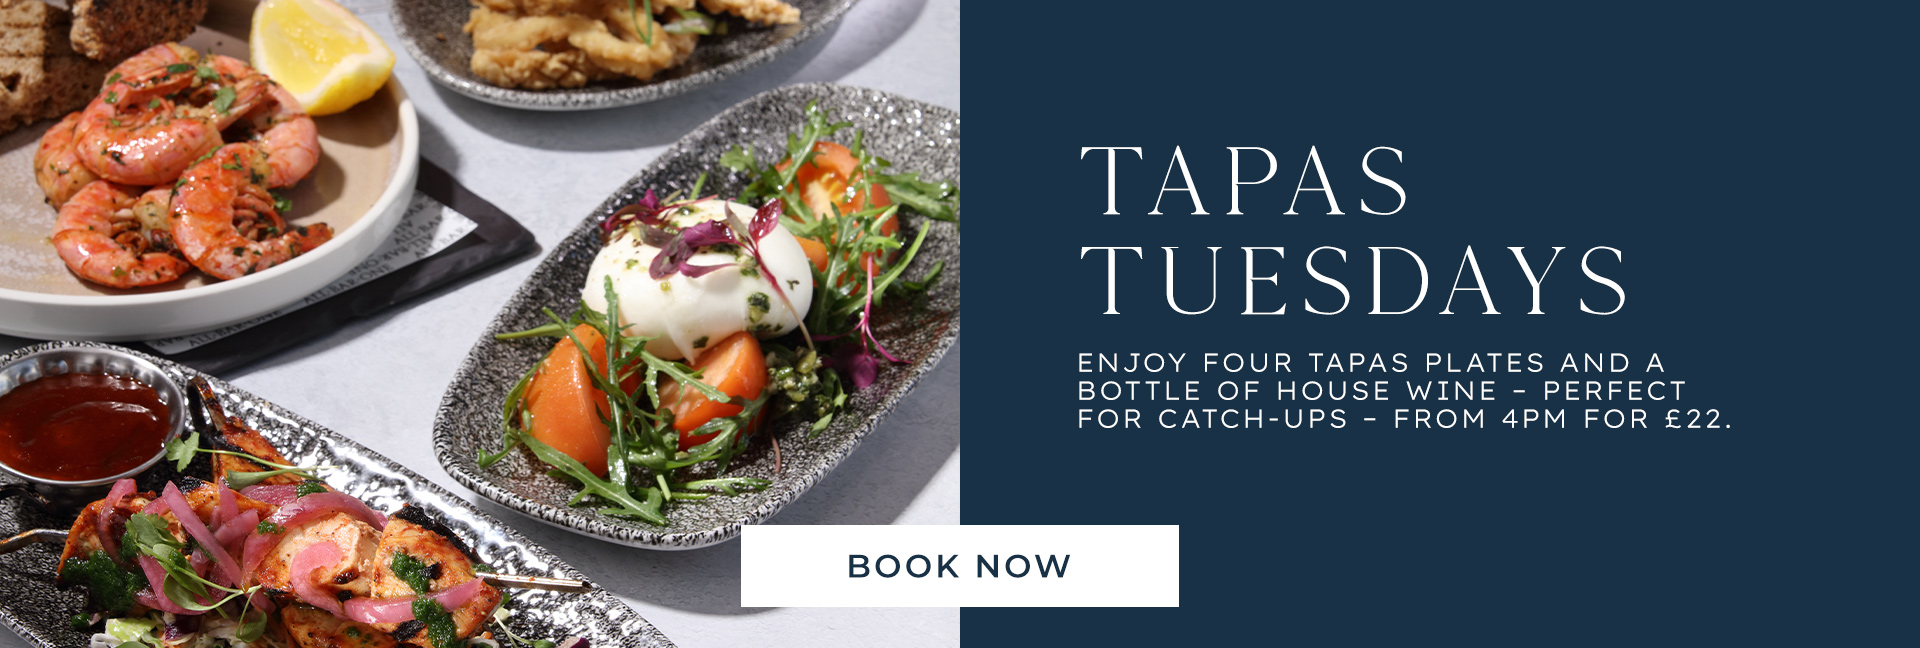 Tapas Tuesday at All Bar One Oxford - Book now